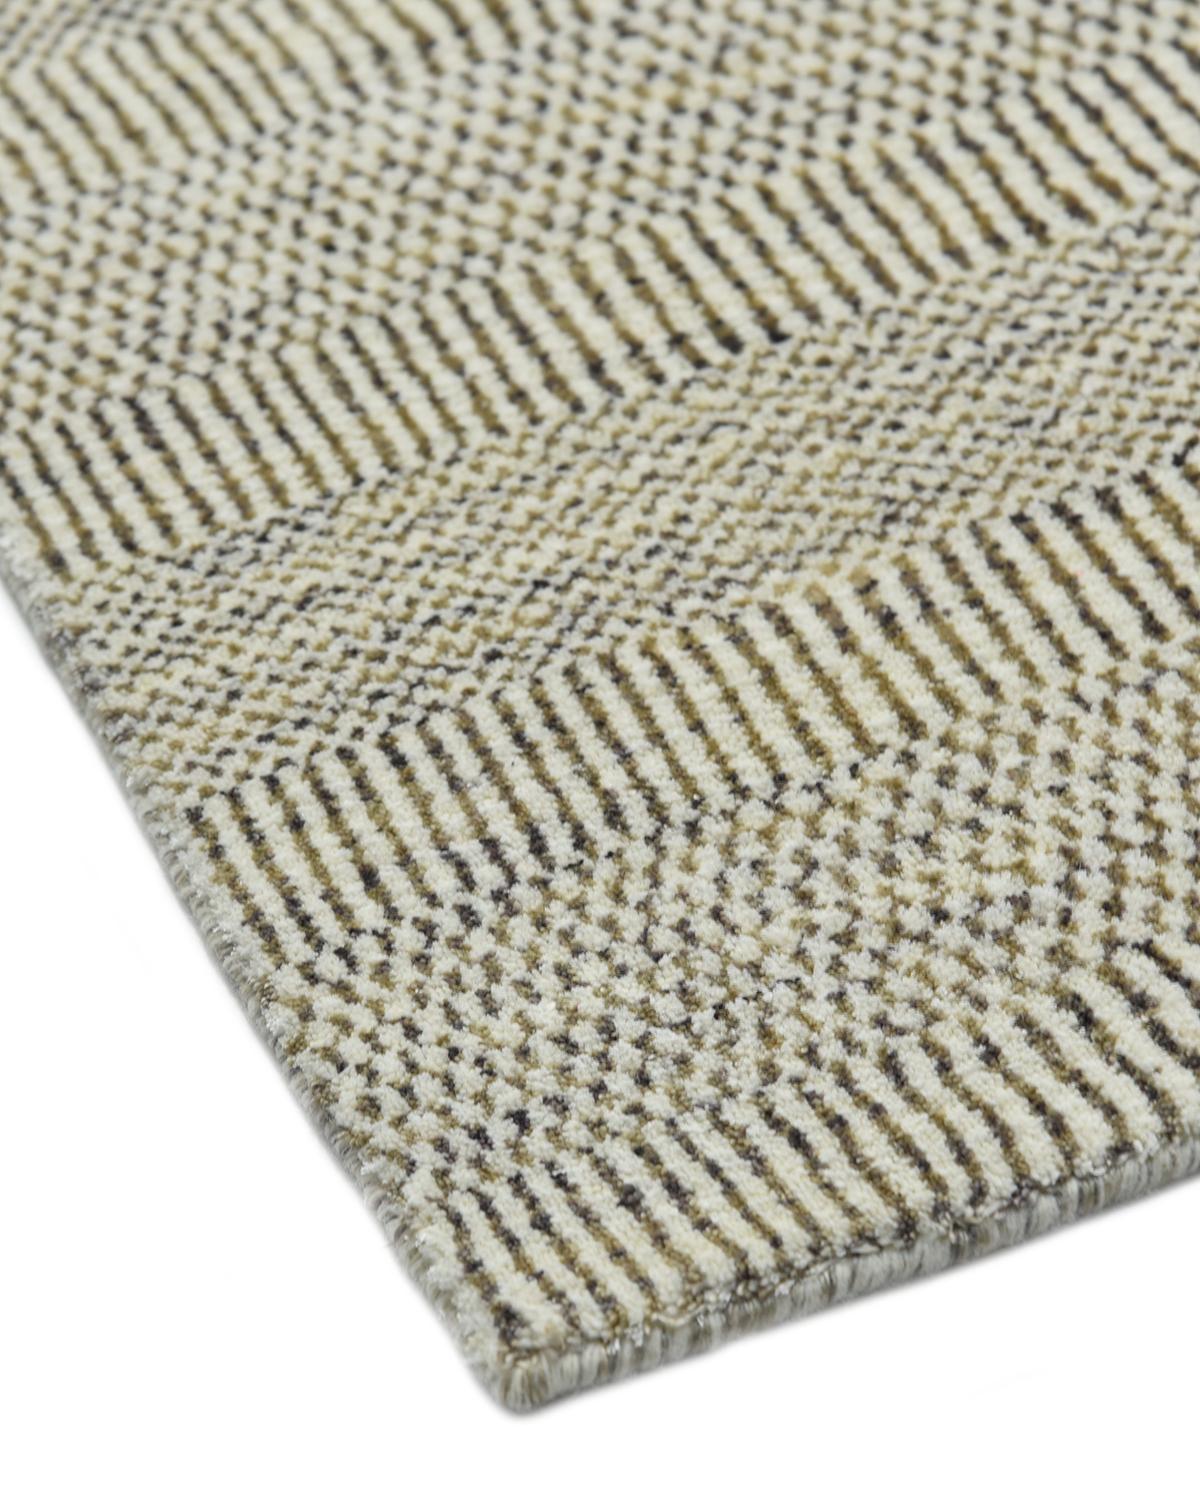 Color: Oat - Made in: India. 60% viscose, 30% wool, 10% cotton. Subtle tone-on-tone stripes give the Solid collection a depth and sophistication all its own. These rugs can pull the disparate elements of a room into a beautifully cohesive whole;